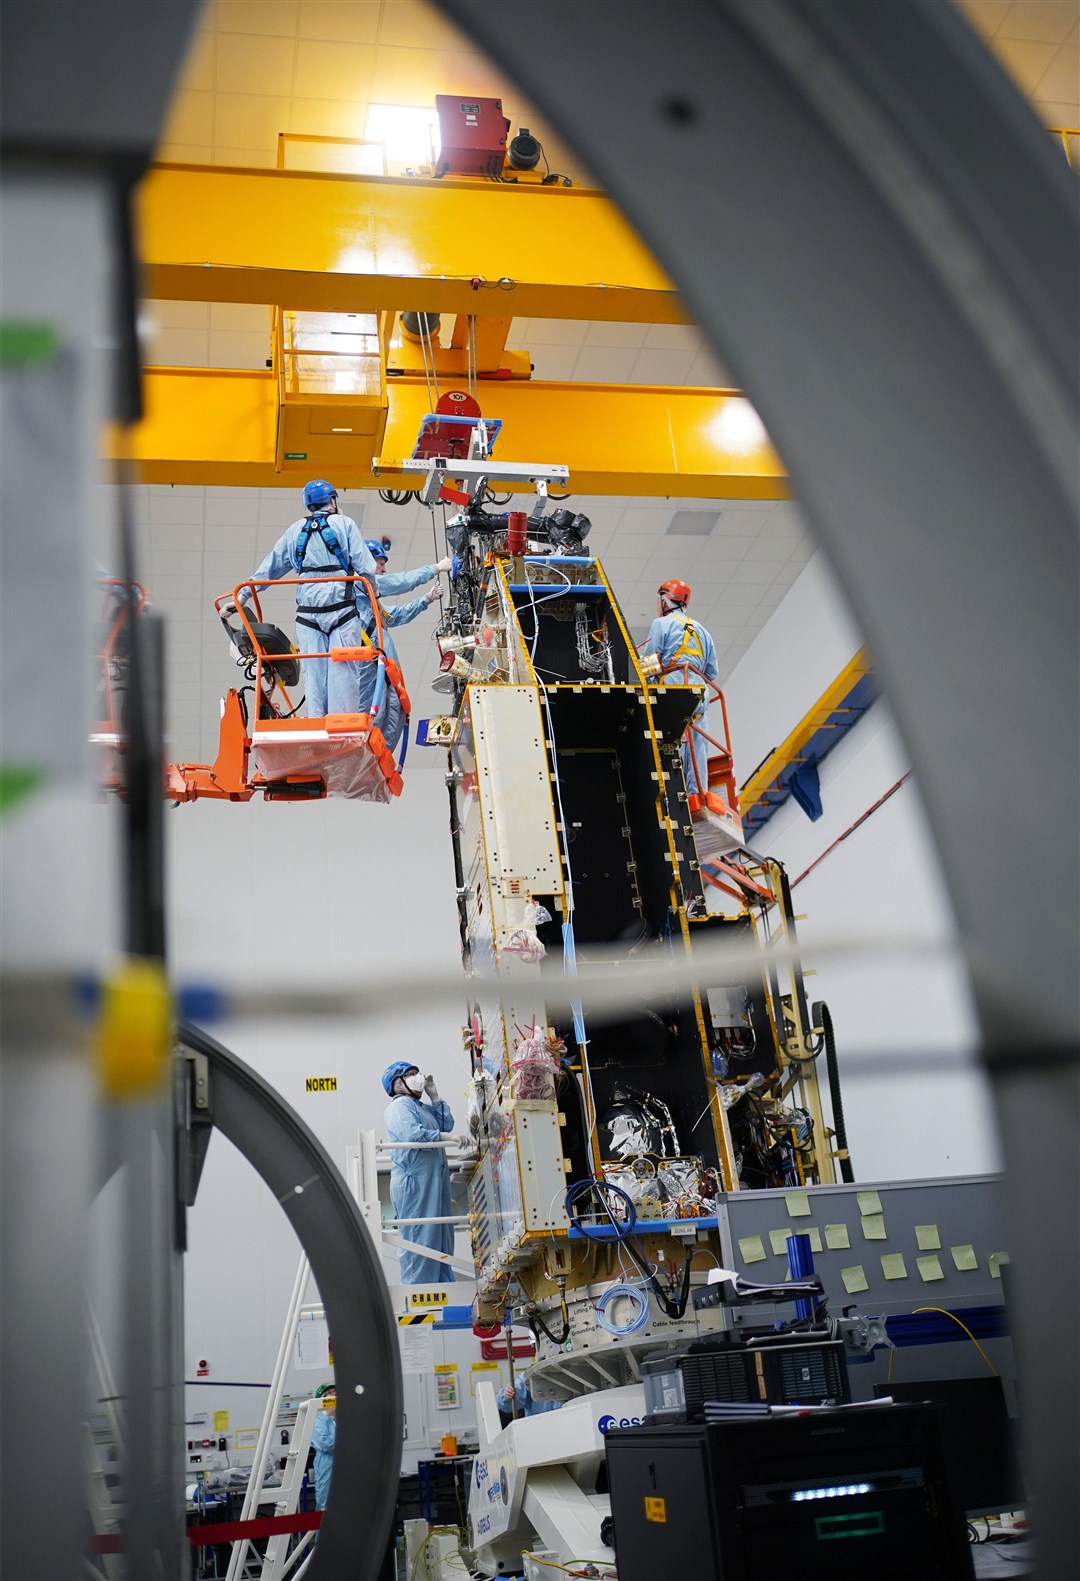 Members of staff work on the Biomass satellite at the Airbus factory in Stevenage, Hertfordshire (Yui Mok/PA)